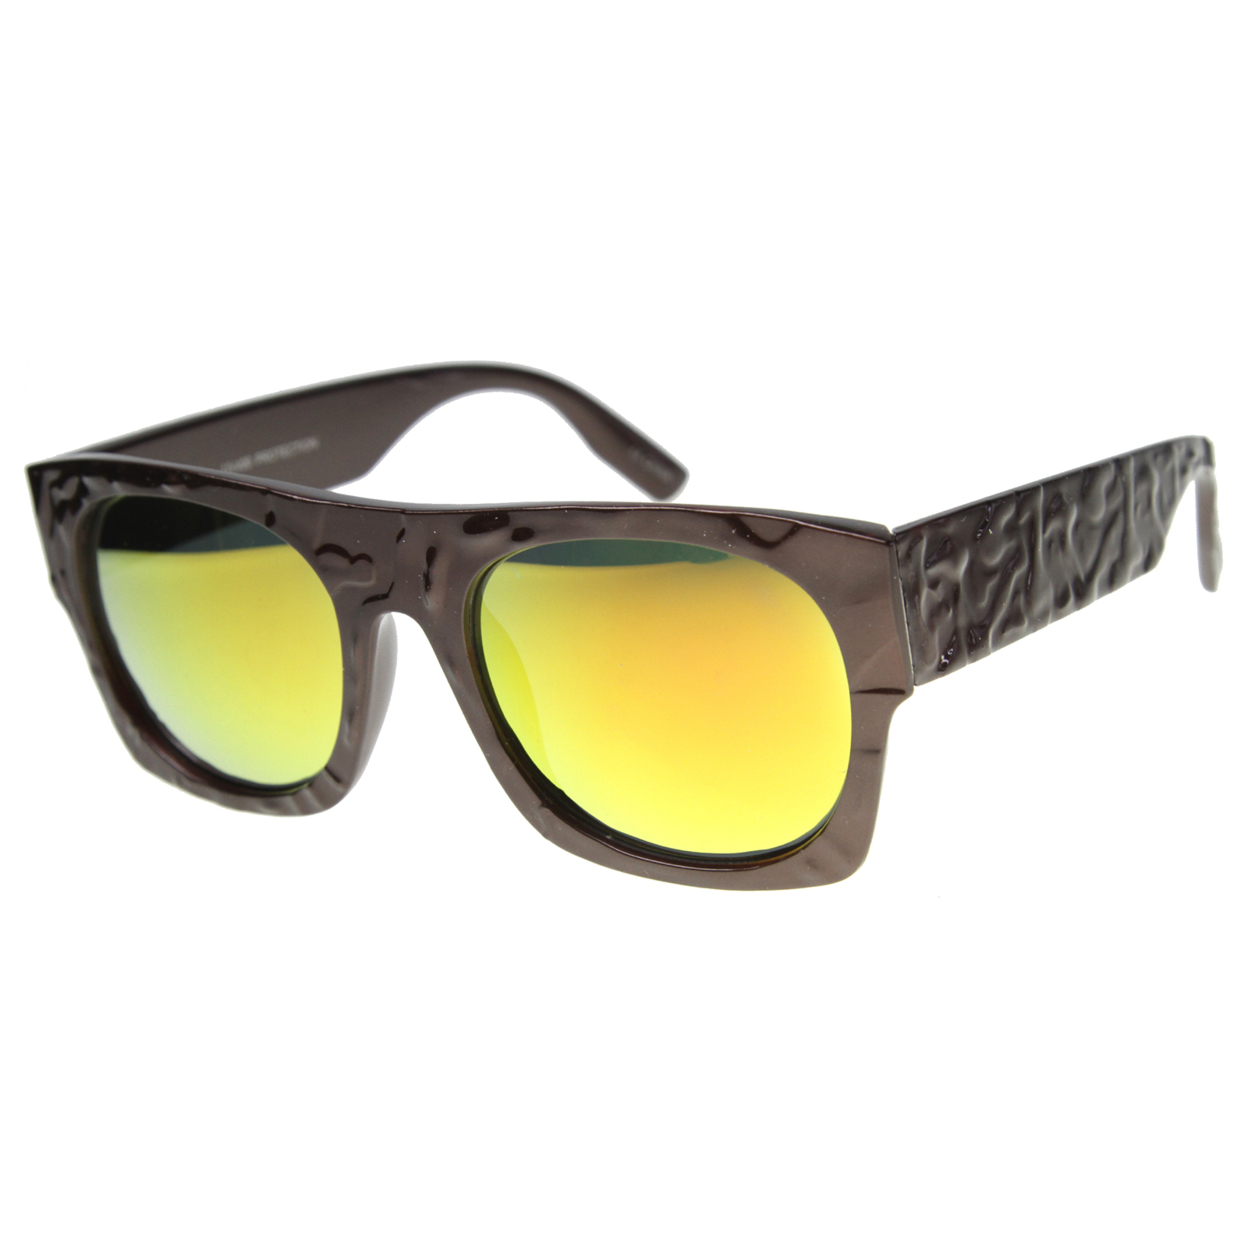 Unisex Rectangular Sunglasses With UV400 Protected Mirrored Lens 9866 - Shiny Black / Fire